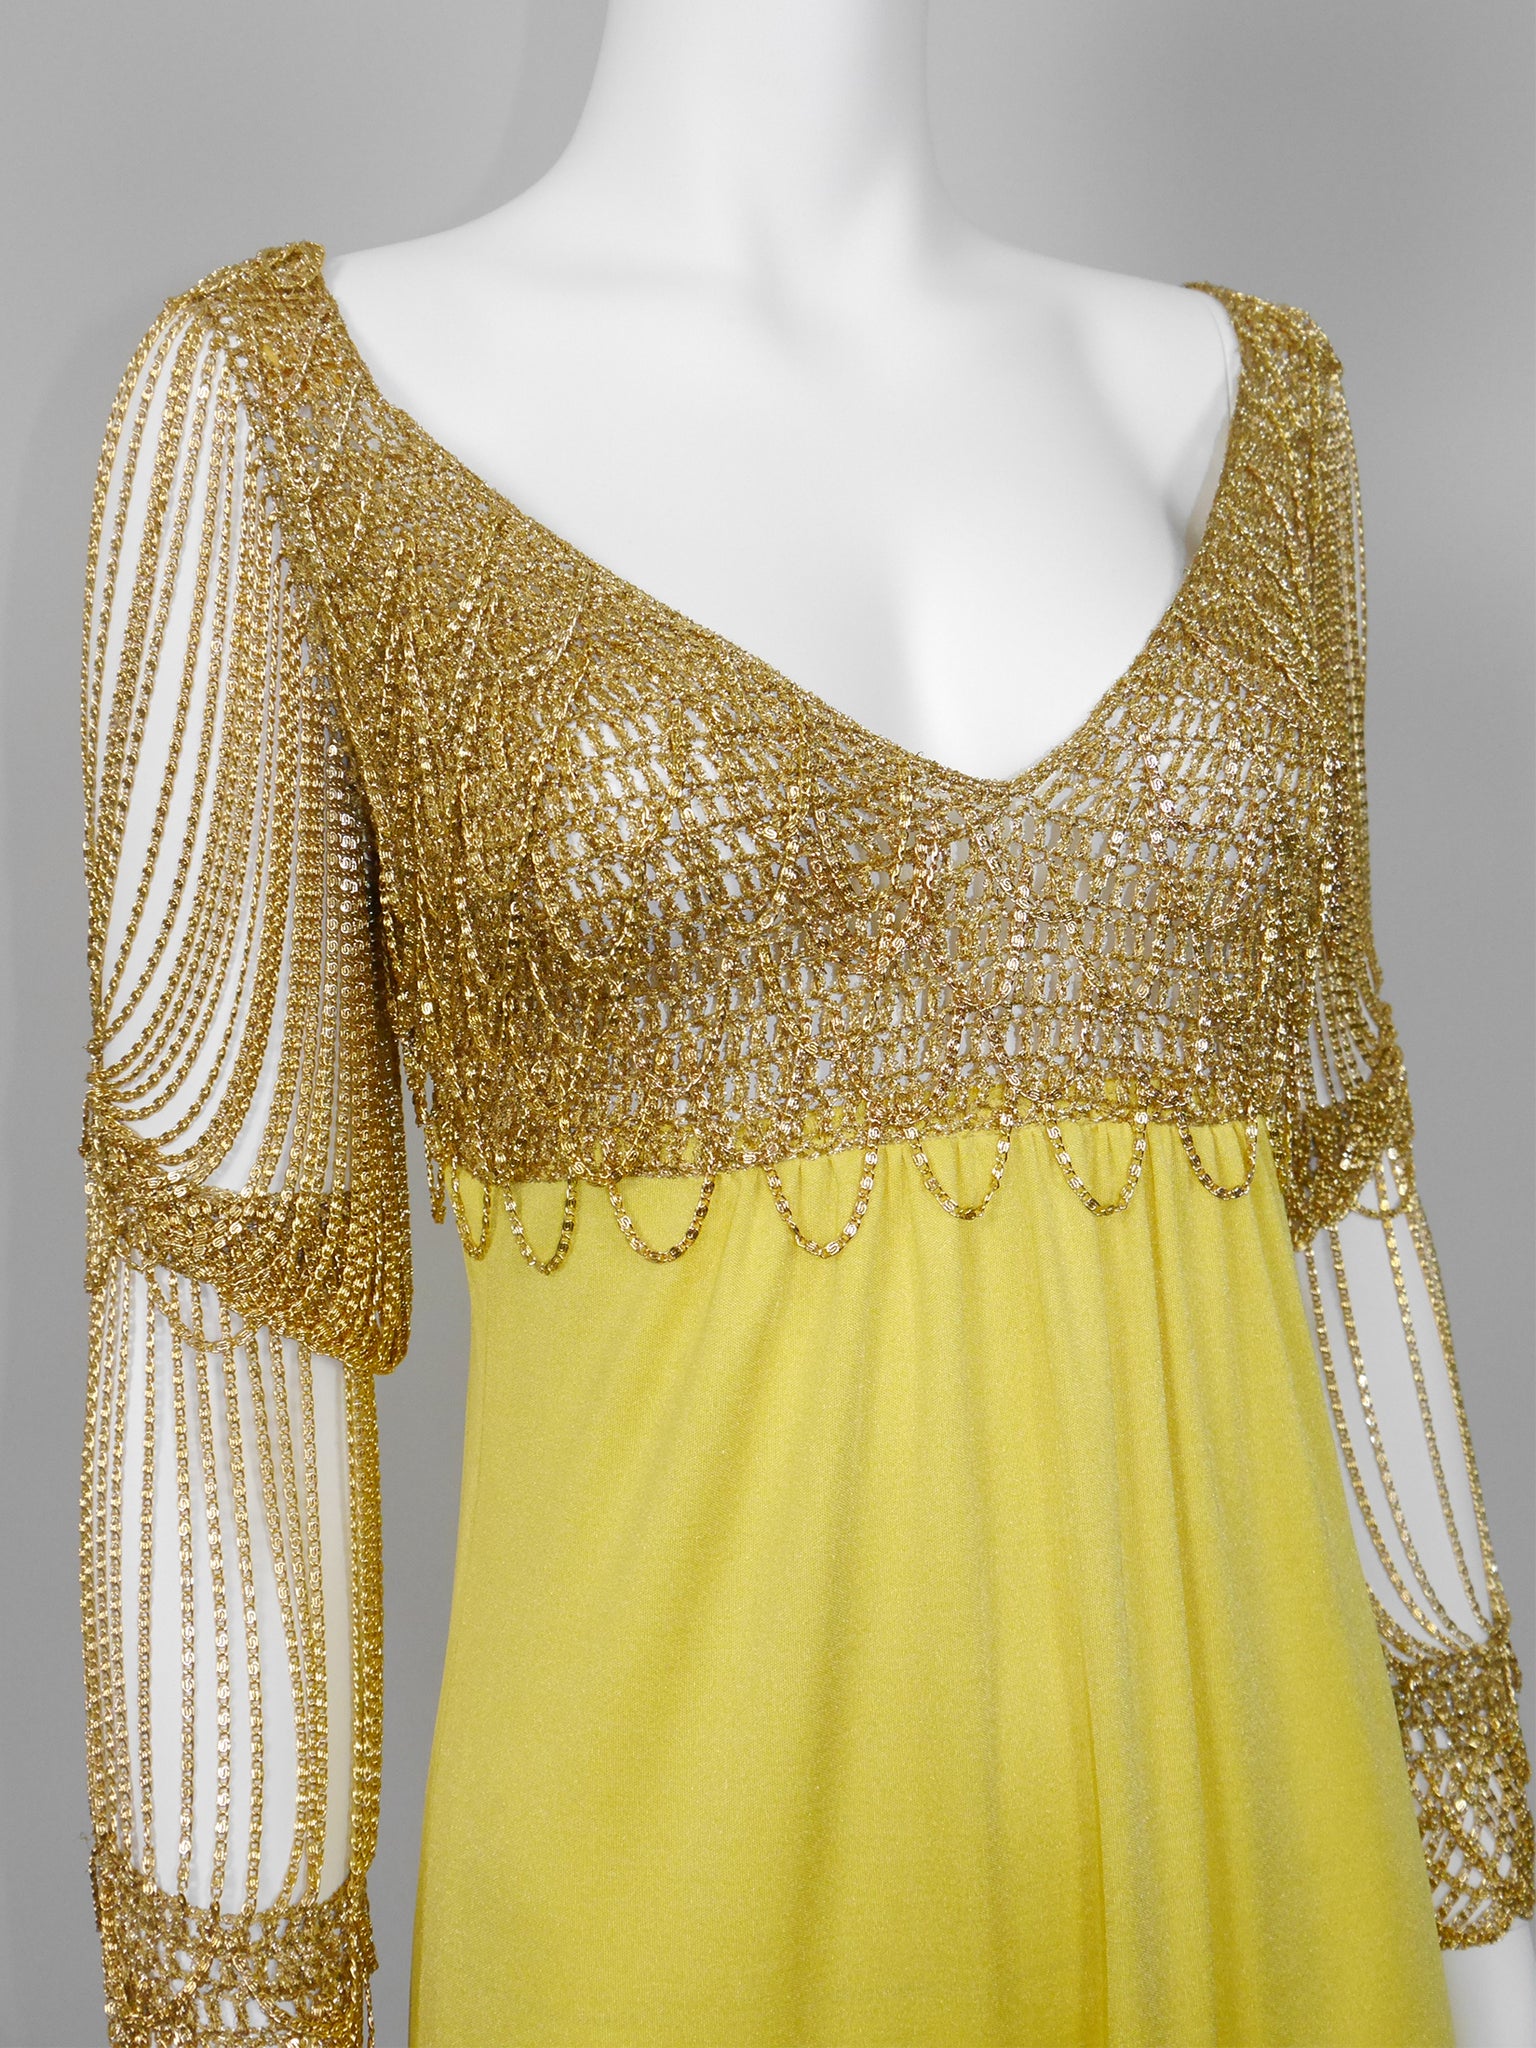 LORIS AZZARO 1970s Vintage Crochet Chainmail Maxi Evening Gown